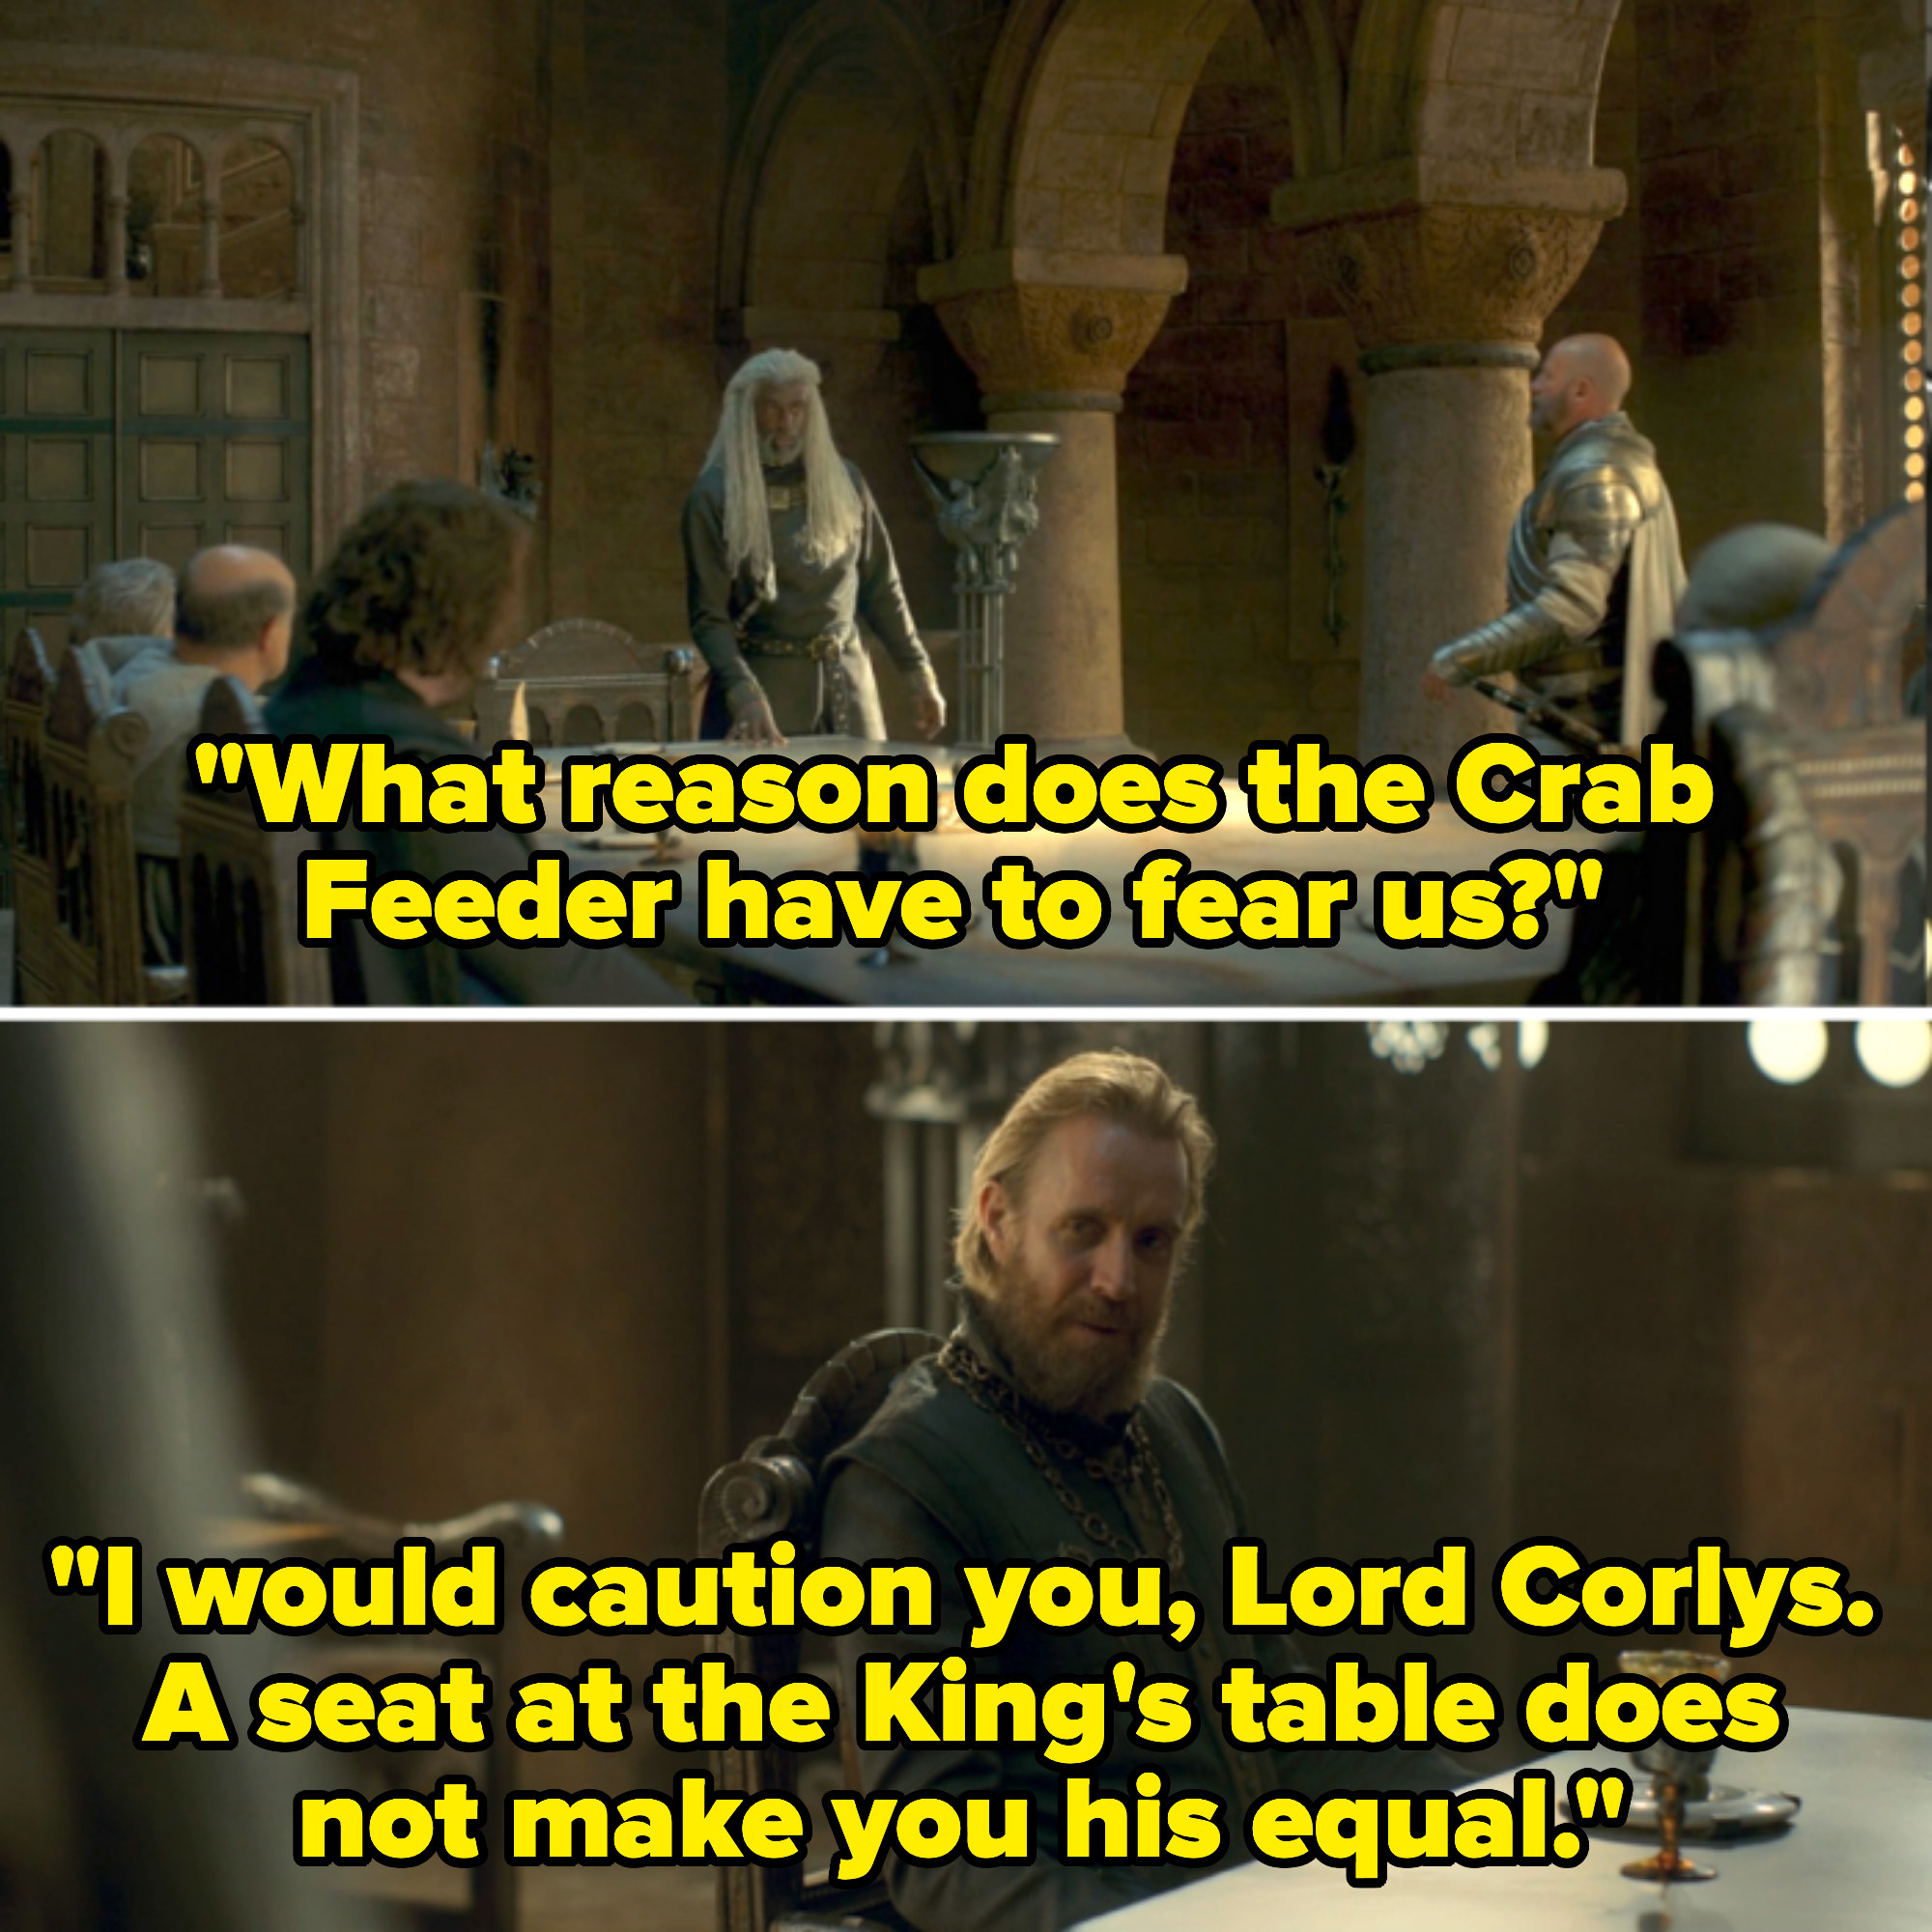 someone telling corlys tat sitting at the king&#x27;s table doens&#x27;t make him an equal